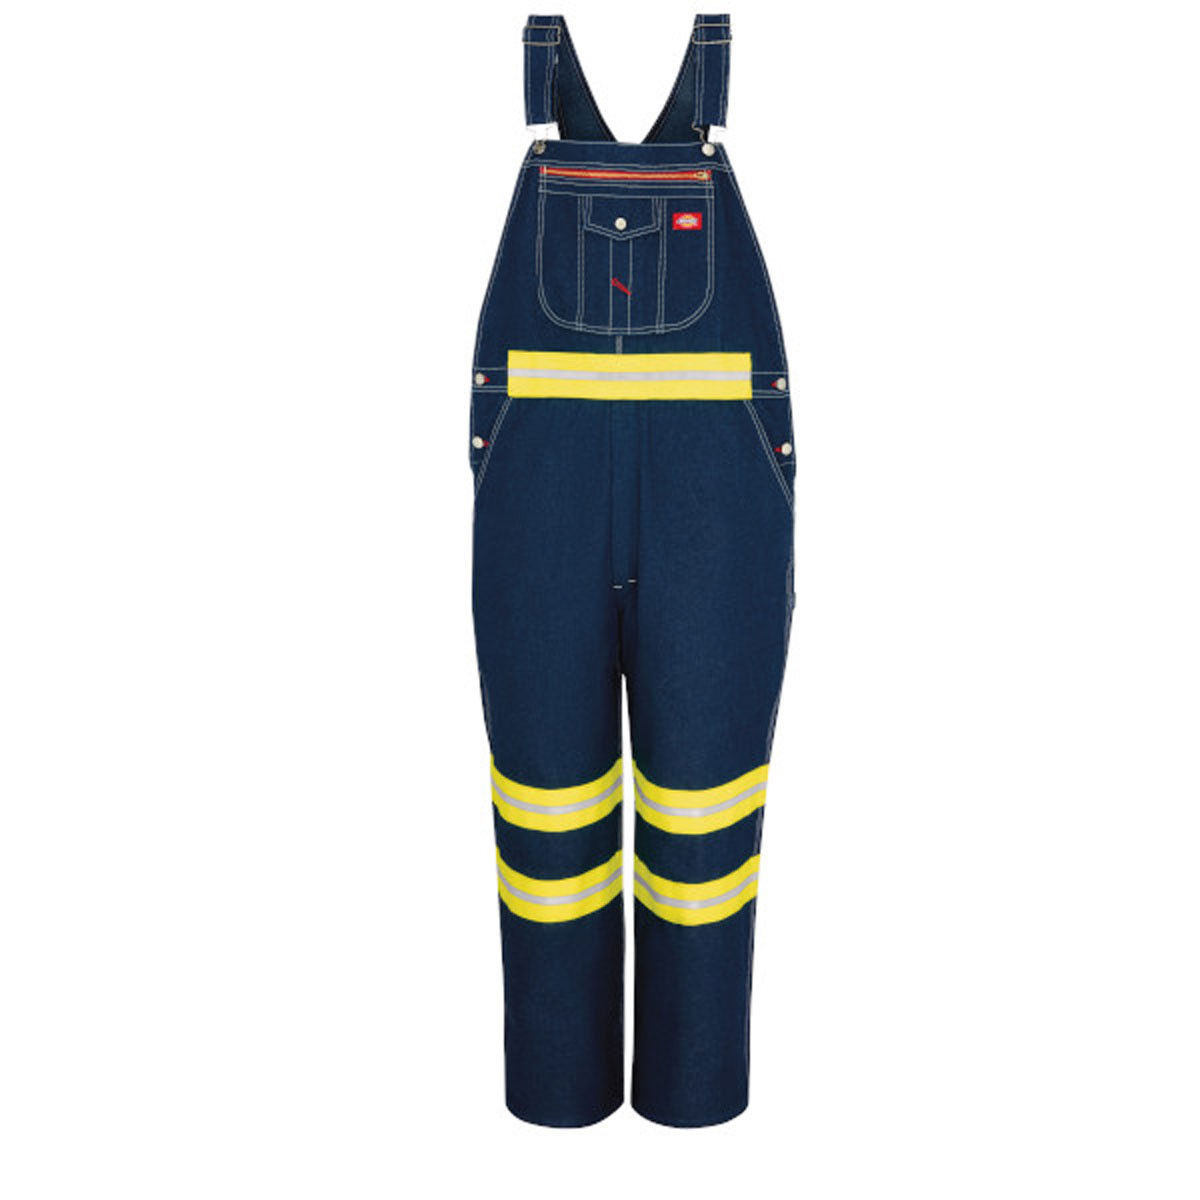 What are the care instructions for Dickies bib overalls before purchase?